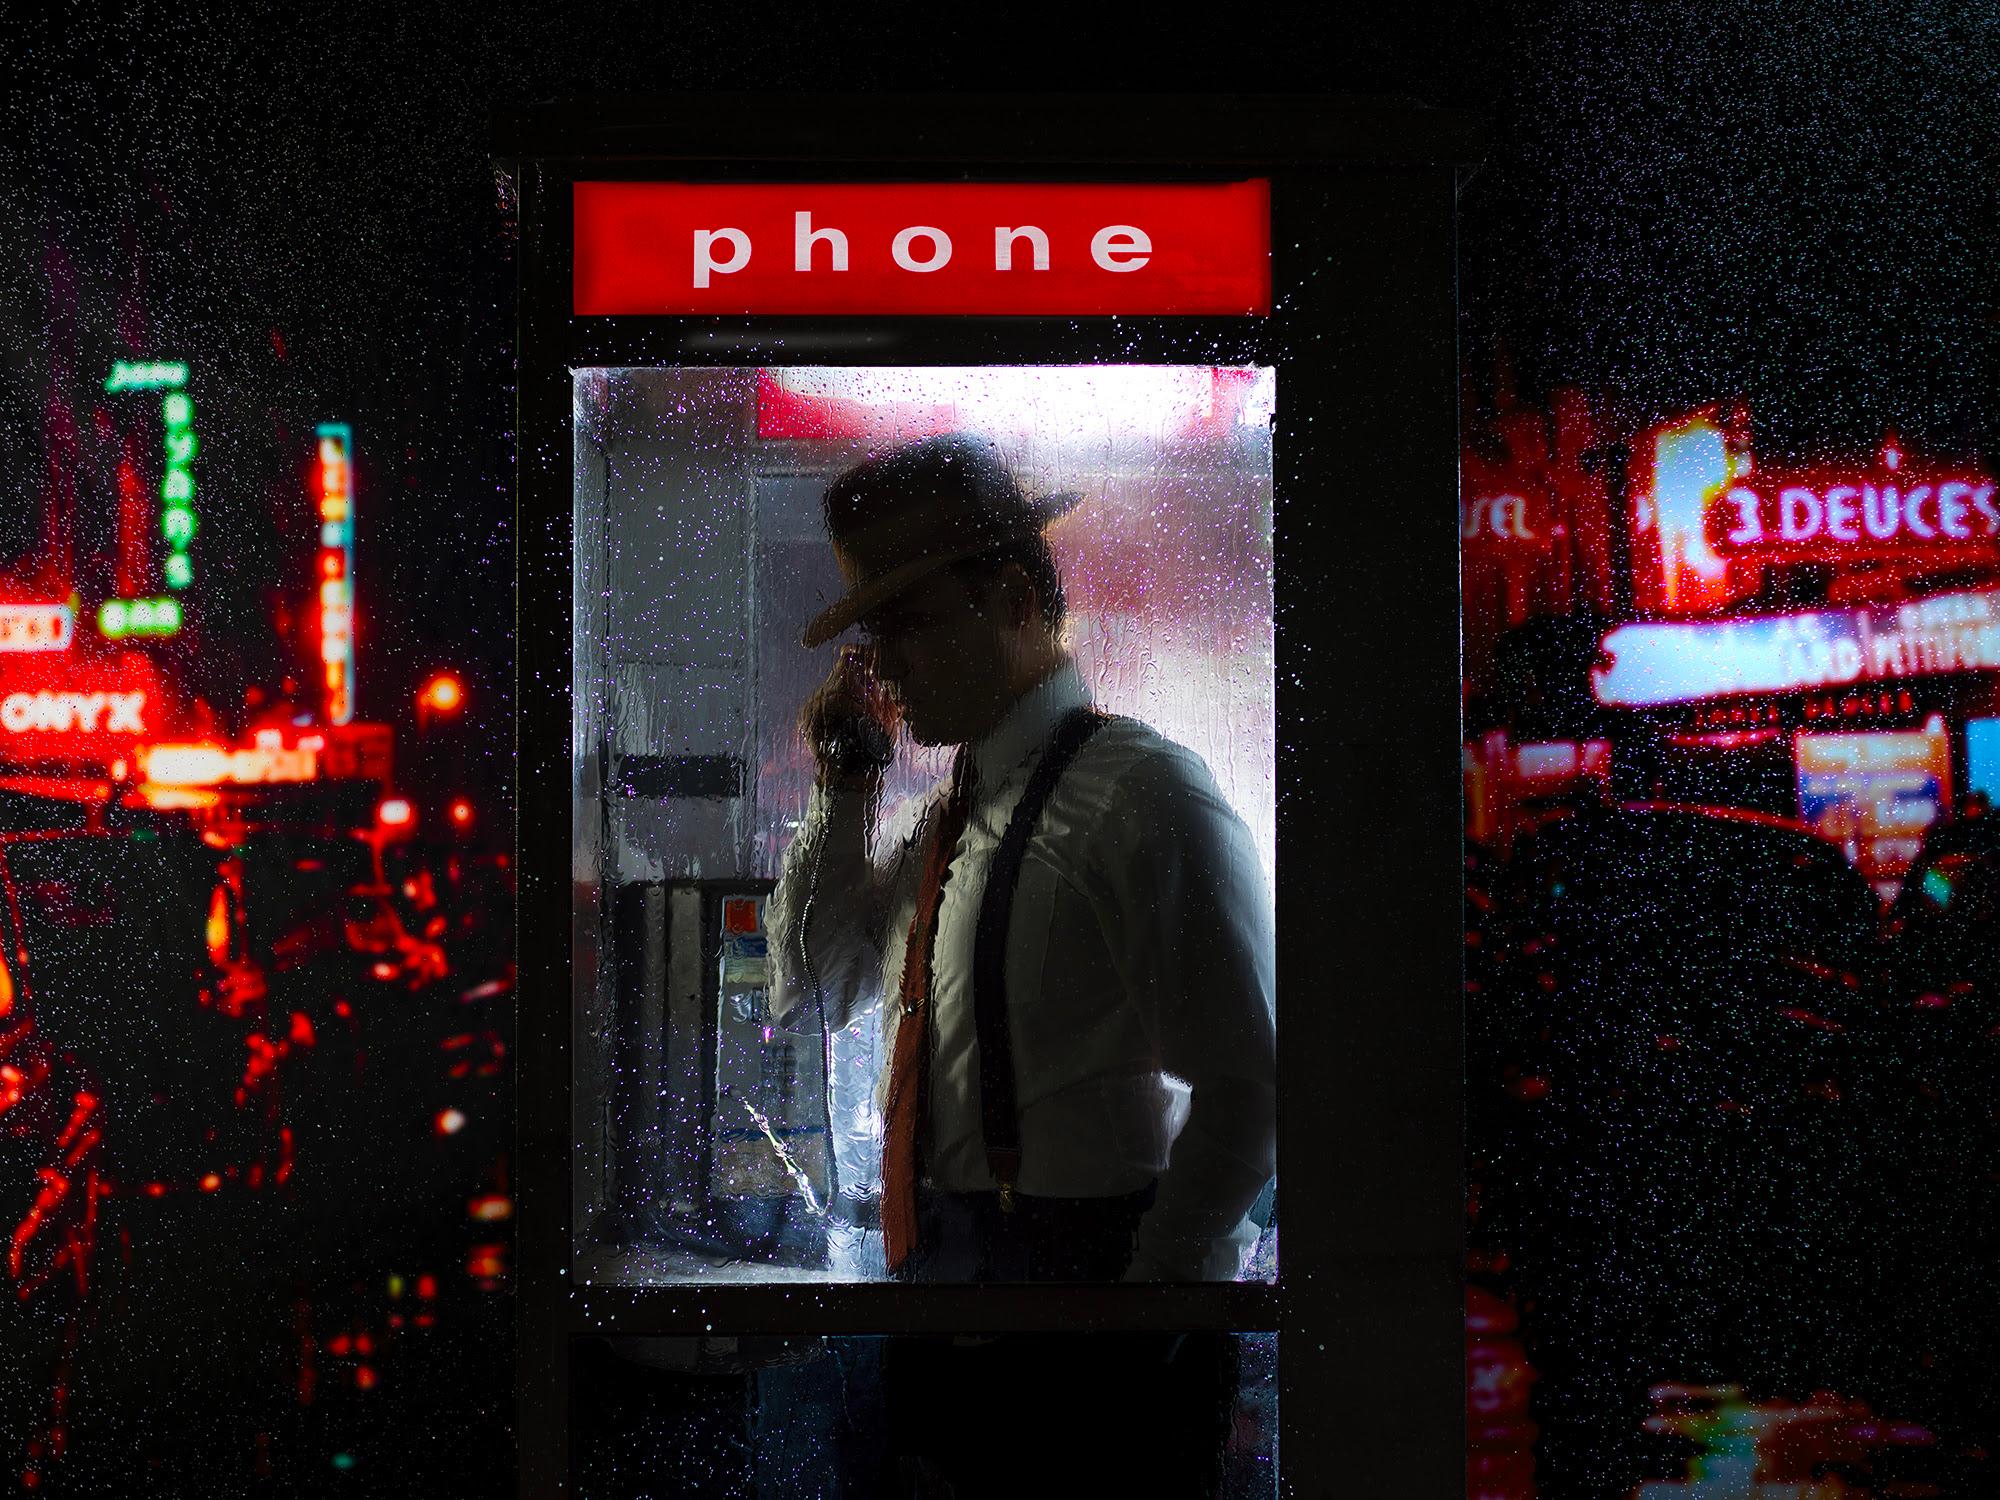 Tyler Shields Black and White Photograph - The Man in the Phone Booth (63" x 84")